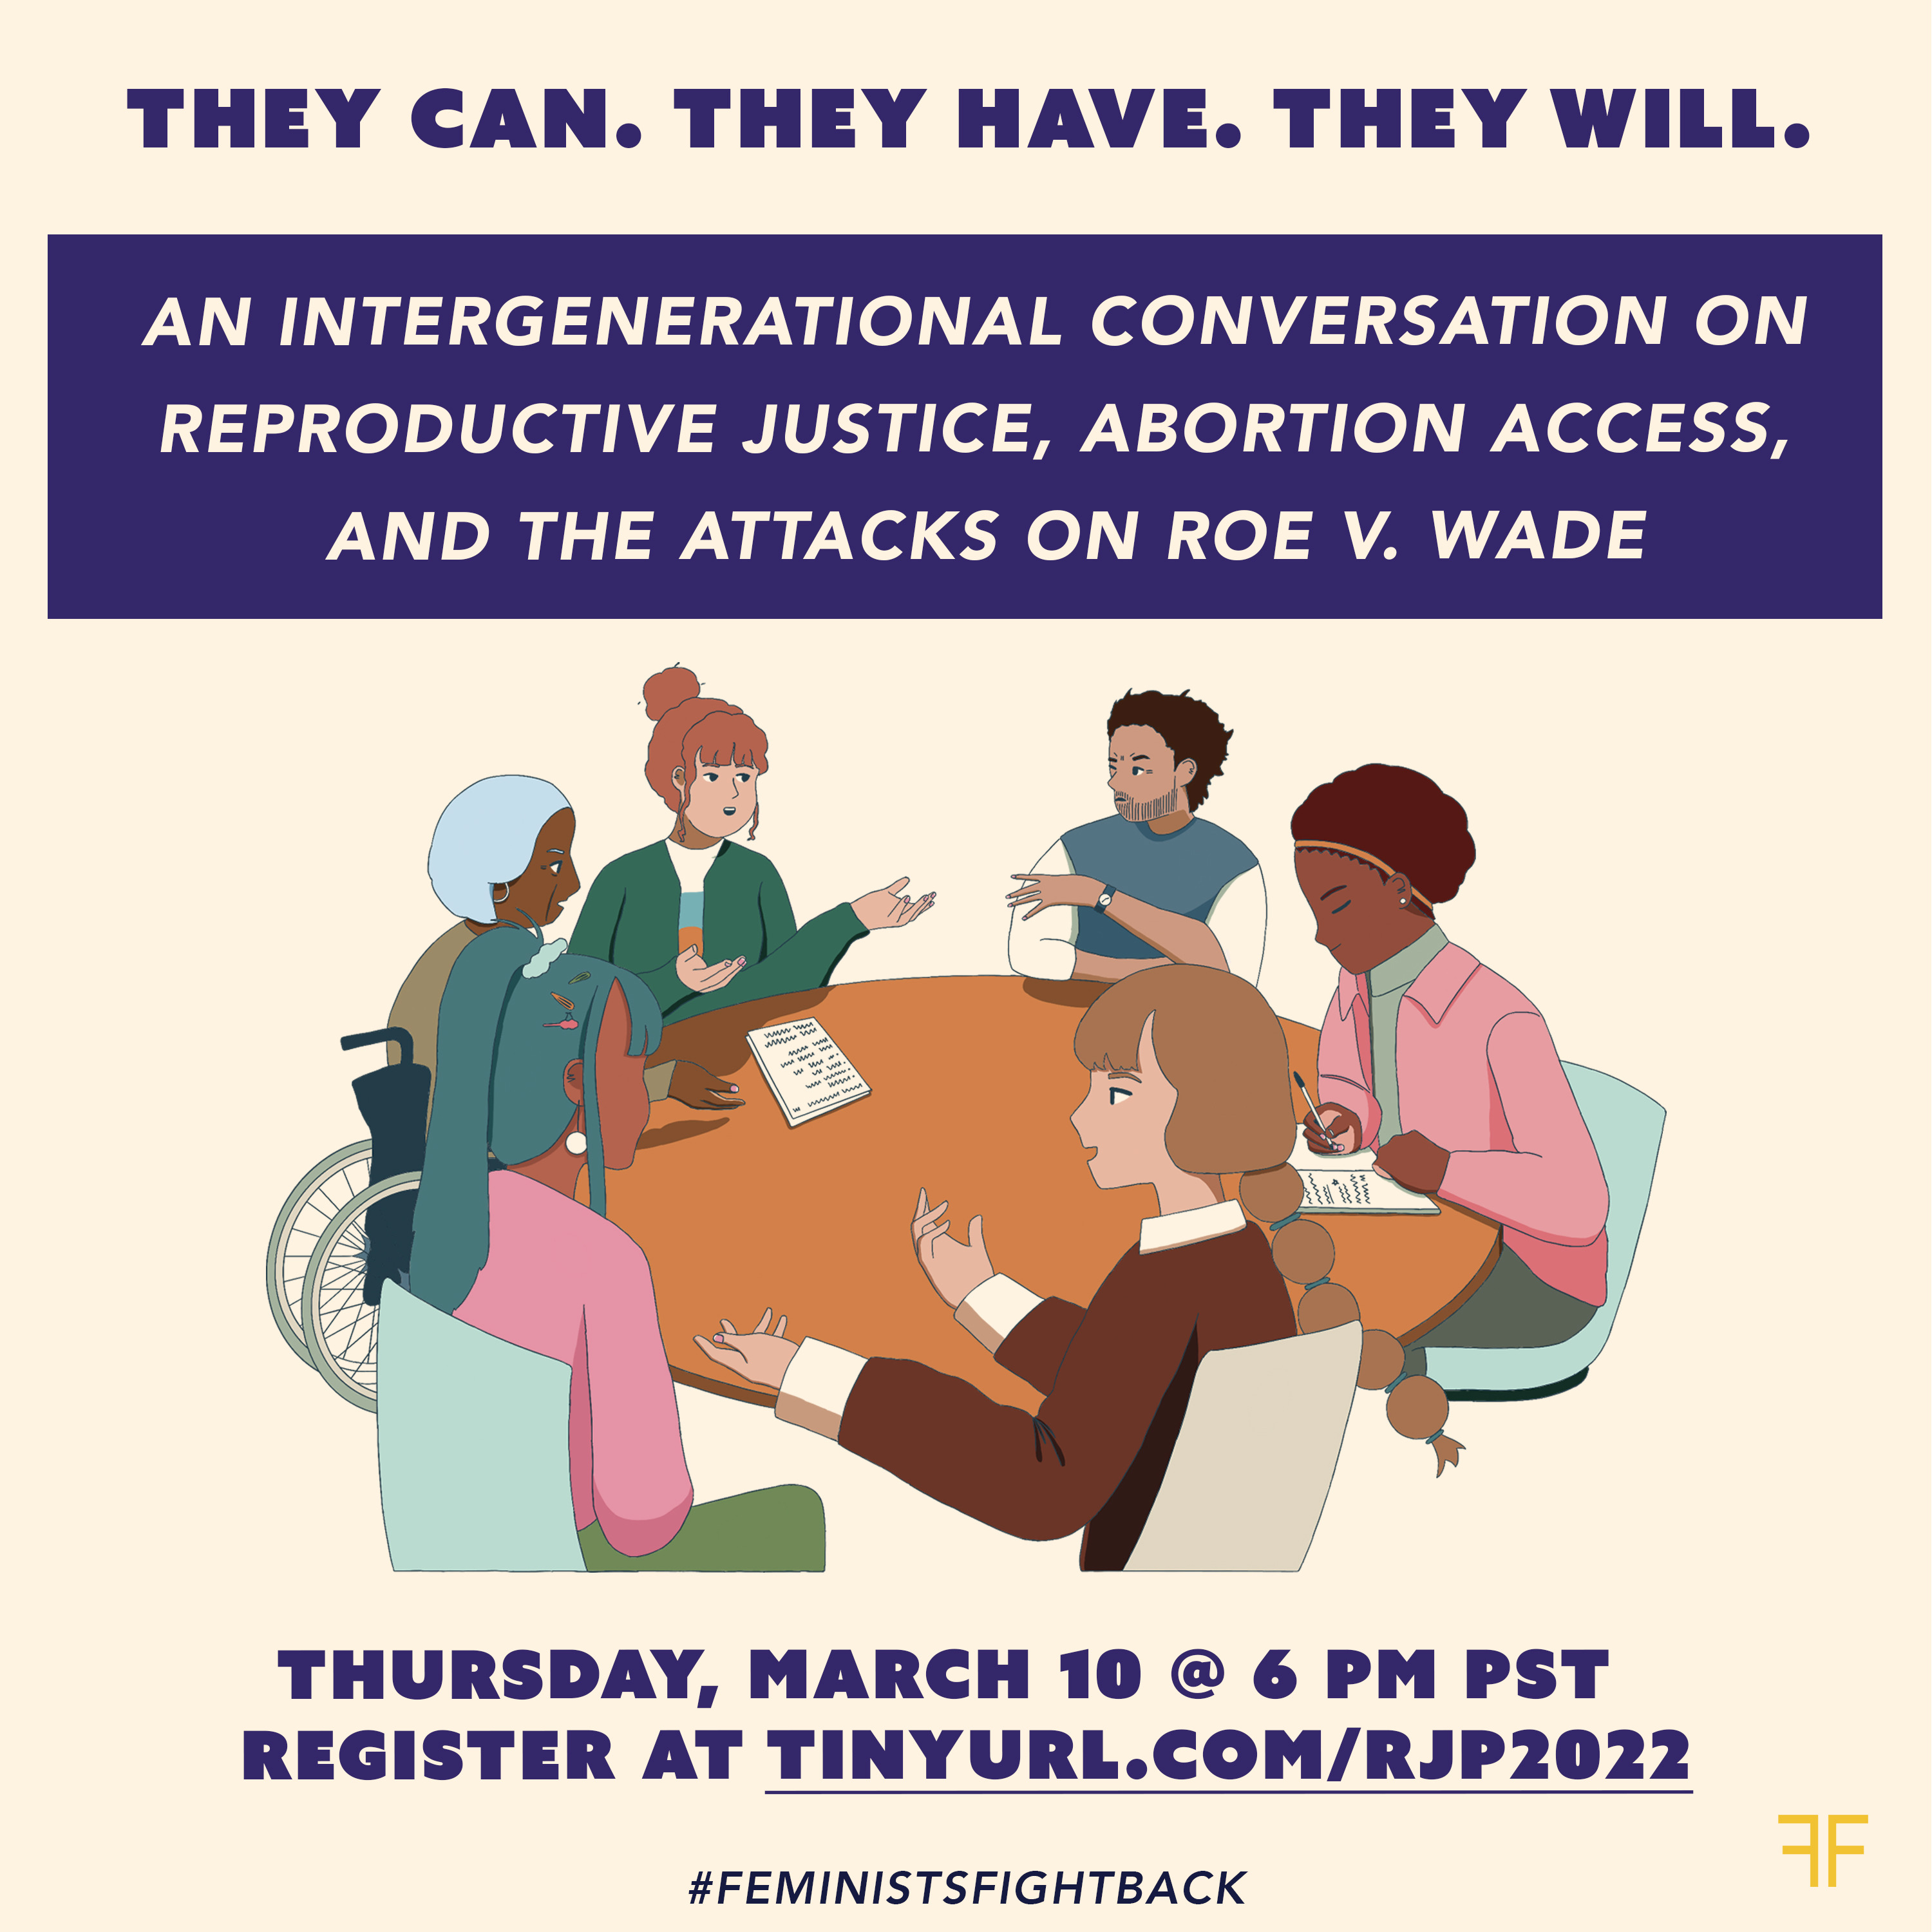 Flyer with illustration of people of various gender identities talking at a roundtable. The text -- "They Can, They Have, They Will: An Intergenerational Conversation on Reproductive Justice and the Attacks on Roe v. Wade Thursday, March 10, 6pm PST on Zoom, Register at tinyurl.com/RJP2022 #FeministsFightBack"